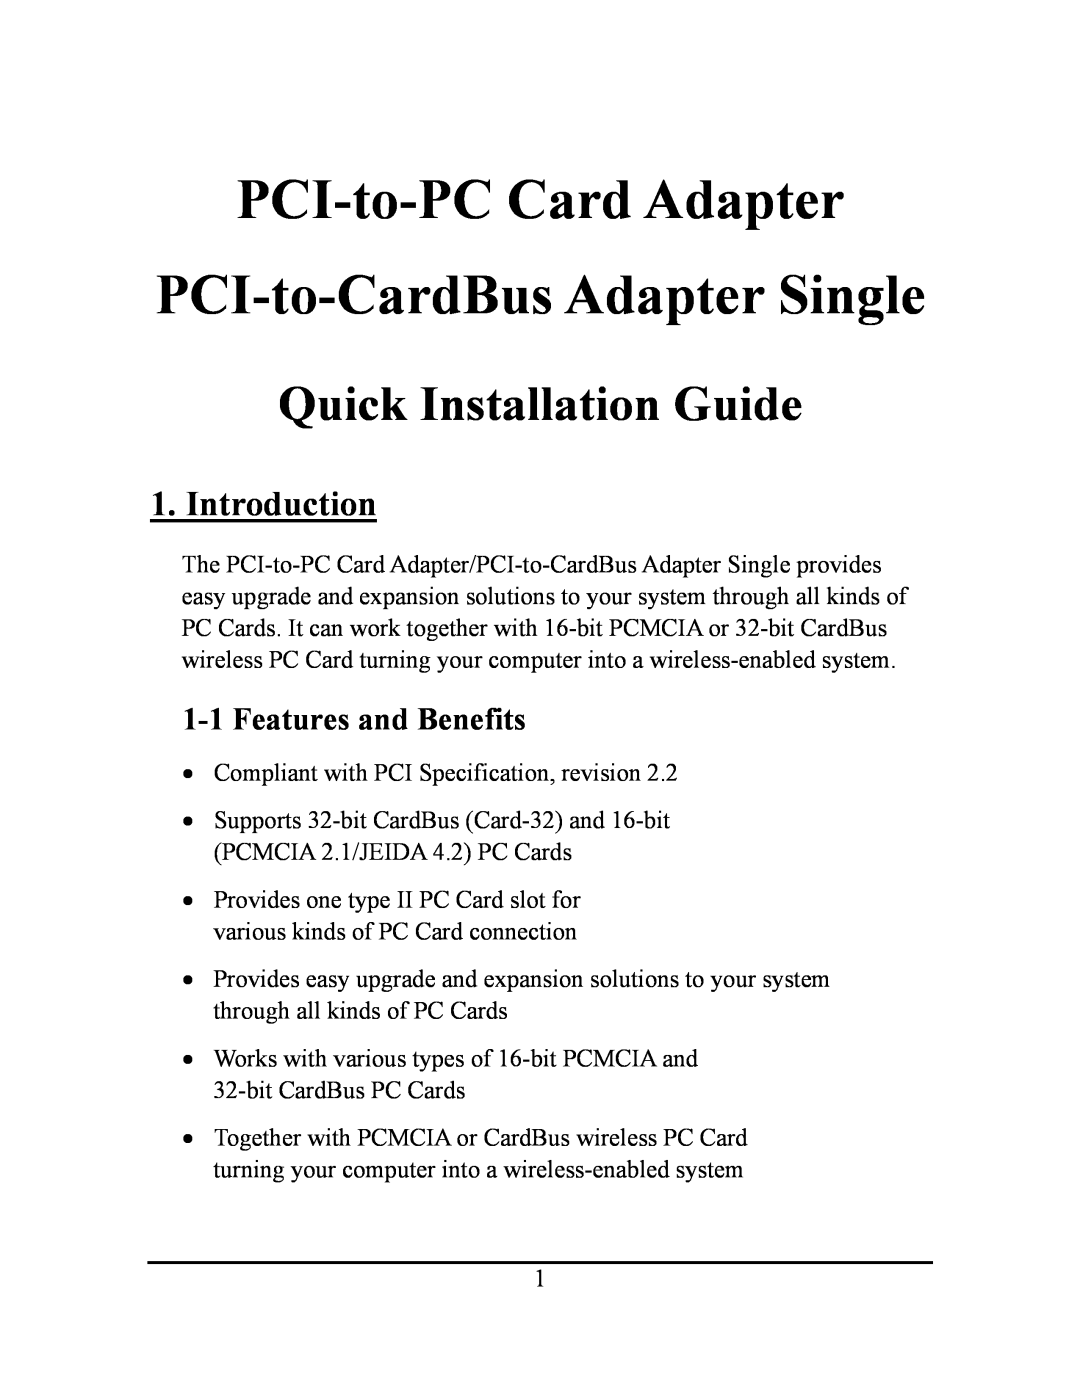 Ricoh PCI-to-PC Card Adapter manual Introduction, Features and Benefits, Quick Installation Guide 